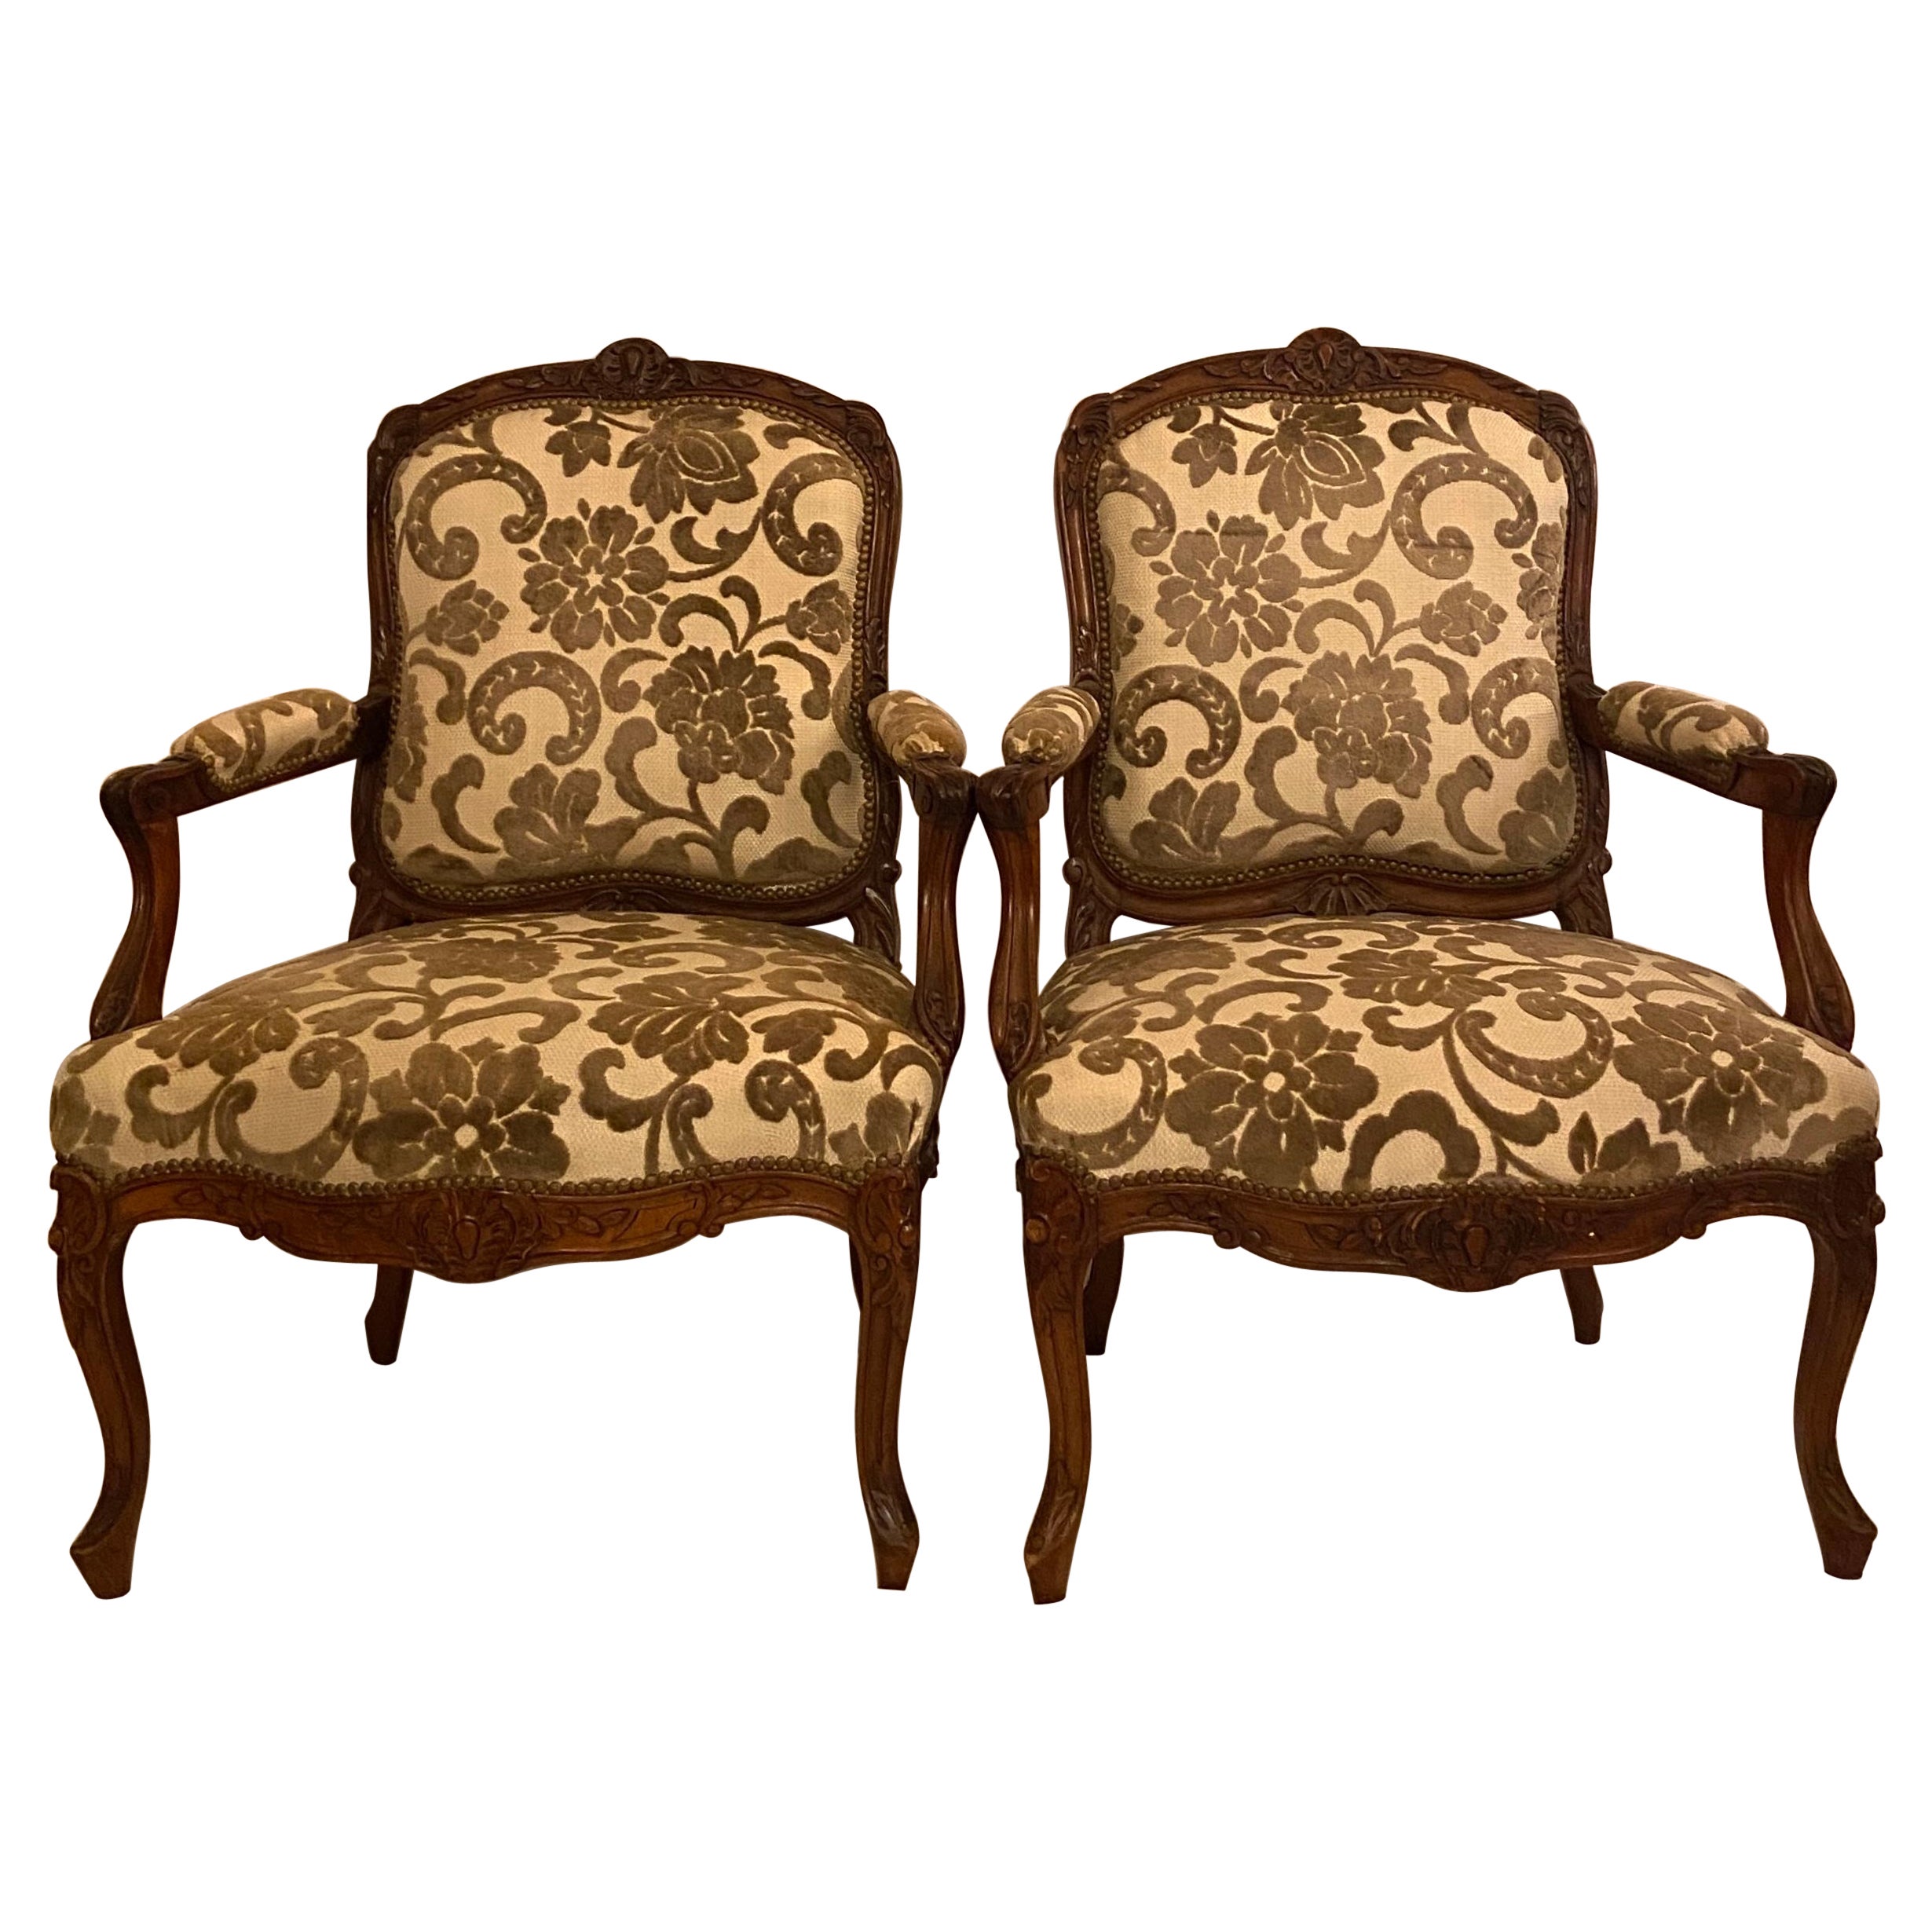 Pair of Antique French Carved Walnut Upholstered Armchairs, circa 1860